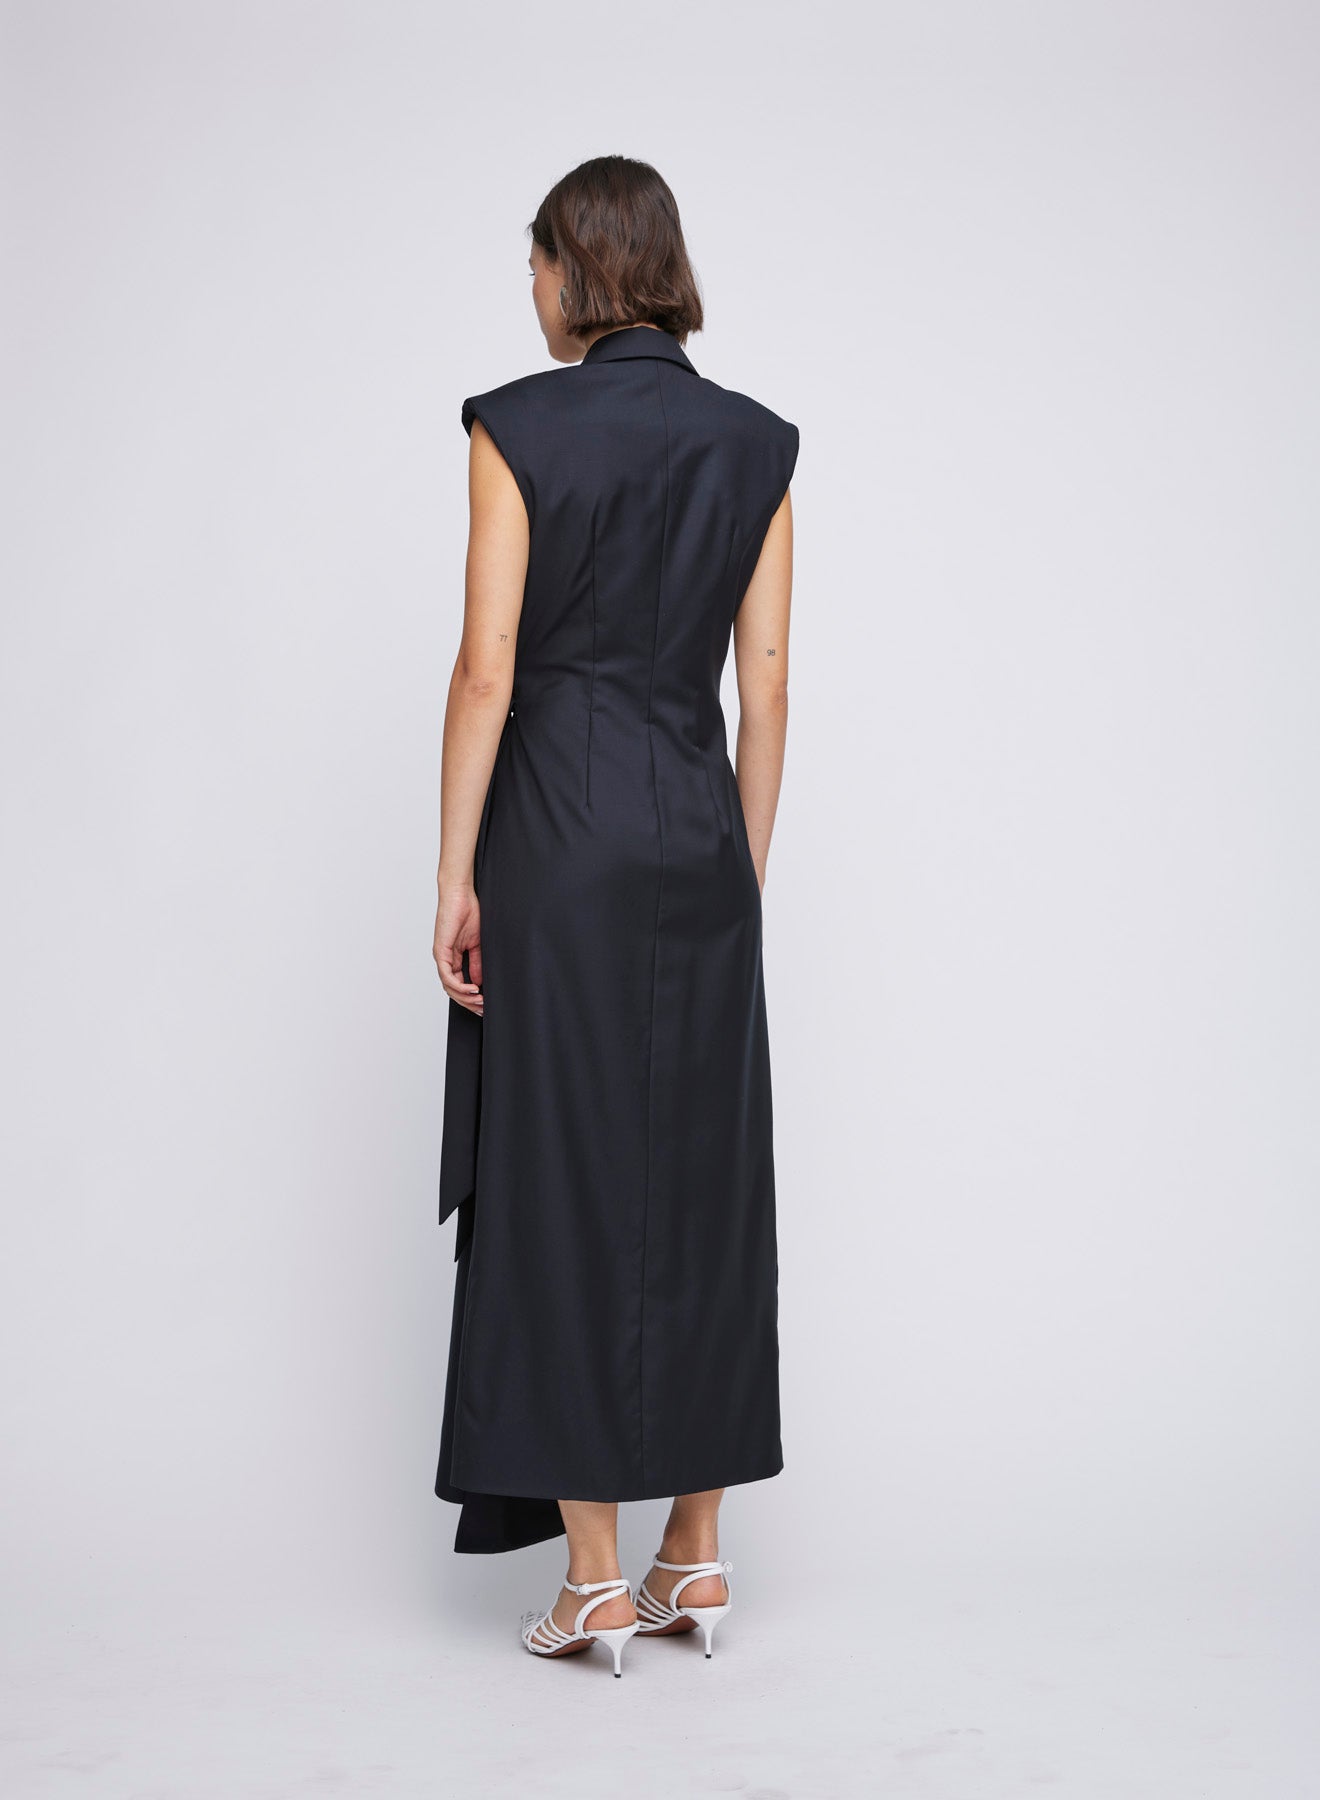 ANNA QUAN Victoria Dress in wrap tailored style. Waist-cinching tie, shoulder pads, v neckline. Ideal for an elegant office-to-dinner ensemble.